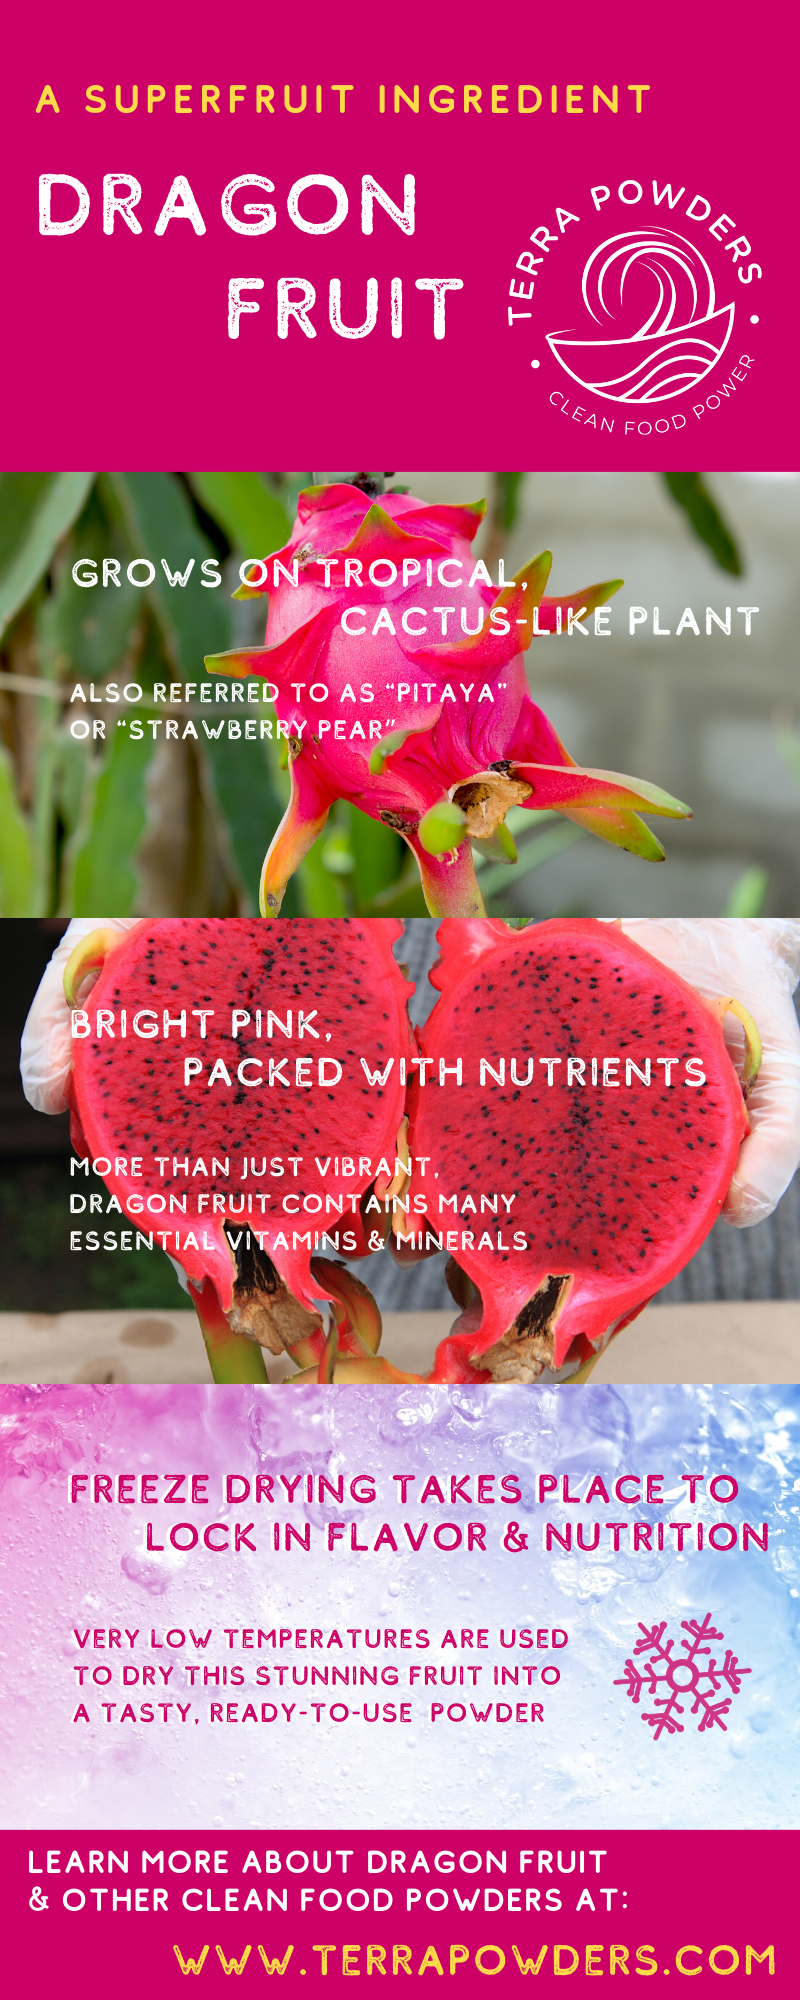 Dragon Fruit Infographic By Terra Powders Freeze-Dried Healthy Clean Food Power